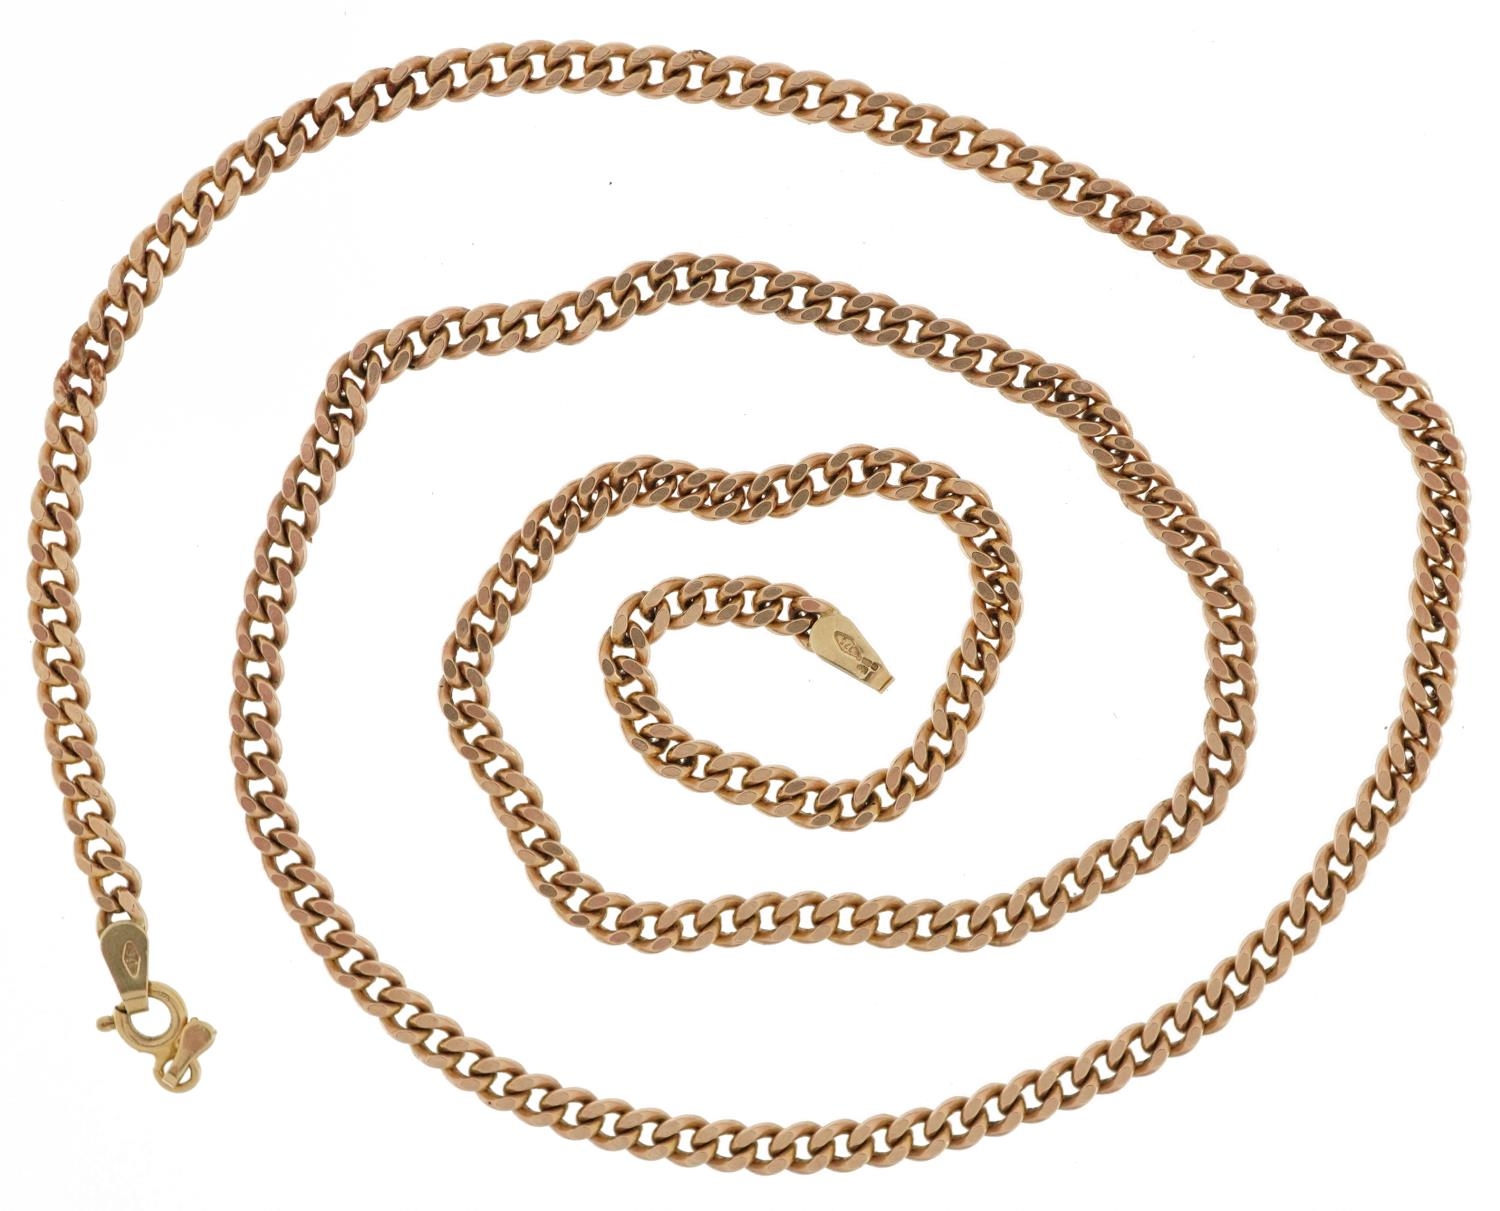 9ct gold curb link necklace, 52cm in length, 17.5g - Image 2 of 3